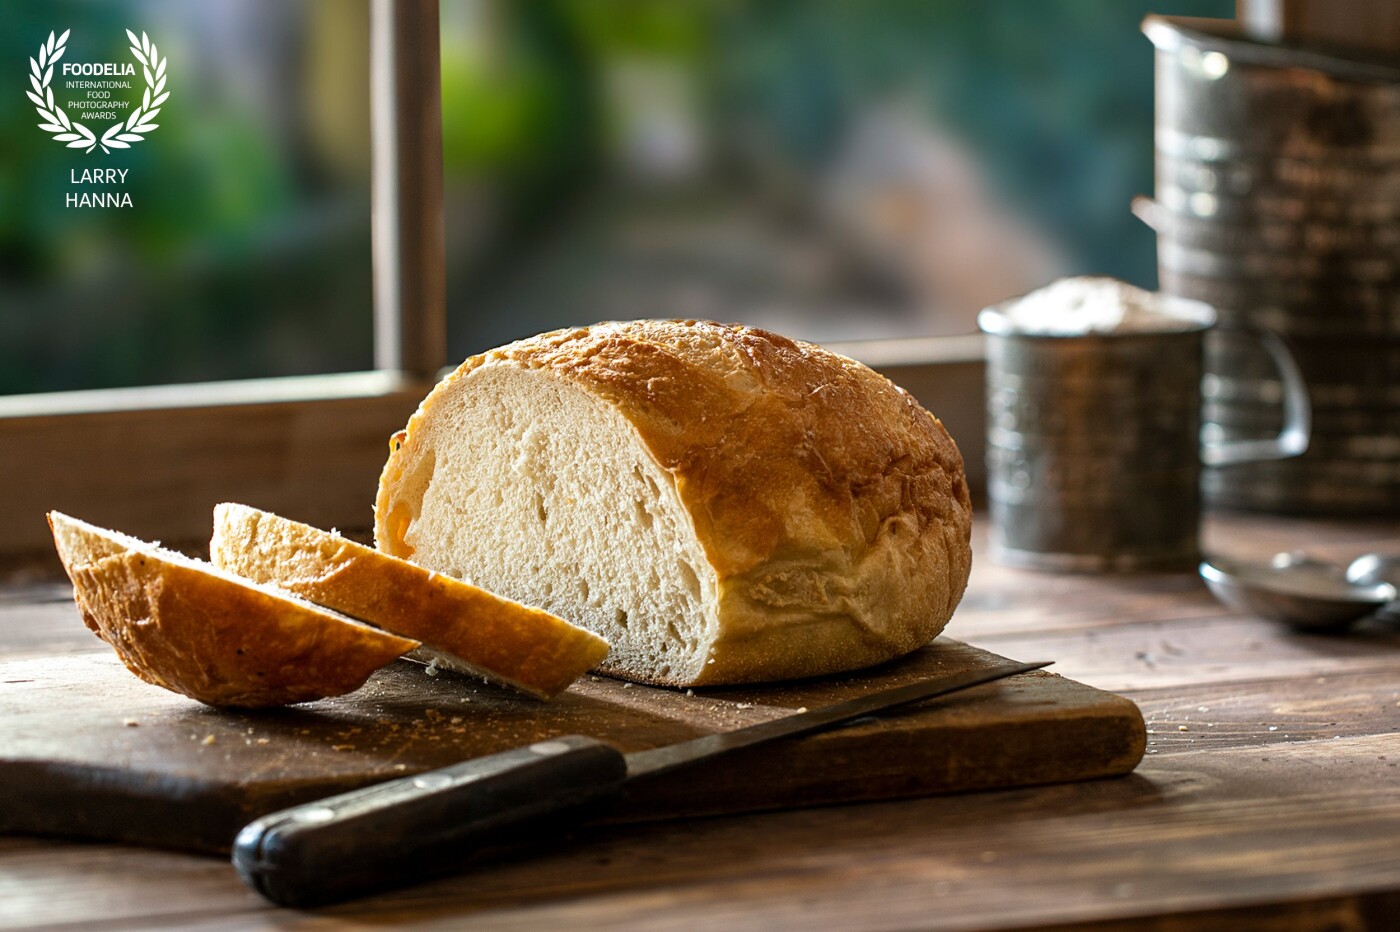 One of my favorite things to photograph and eat is bread.  I created this set in my kitchen using only window light.  The out of focus view in the window is an image I created in Ravello Italy last year.